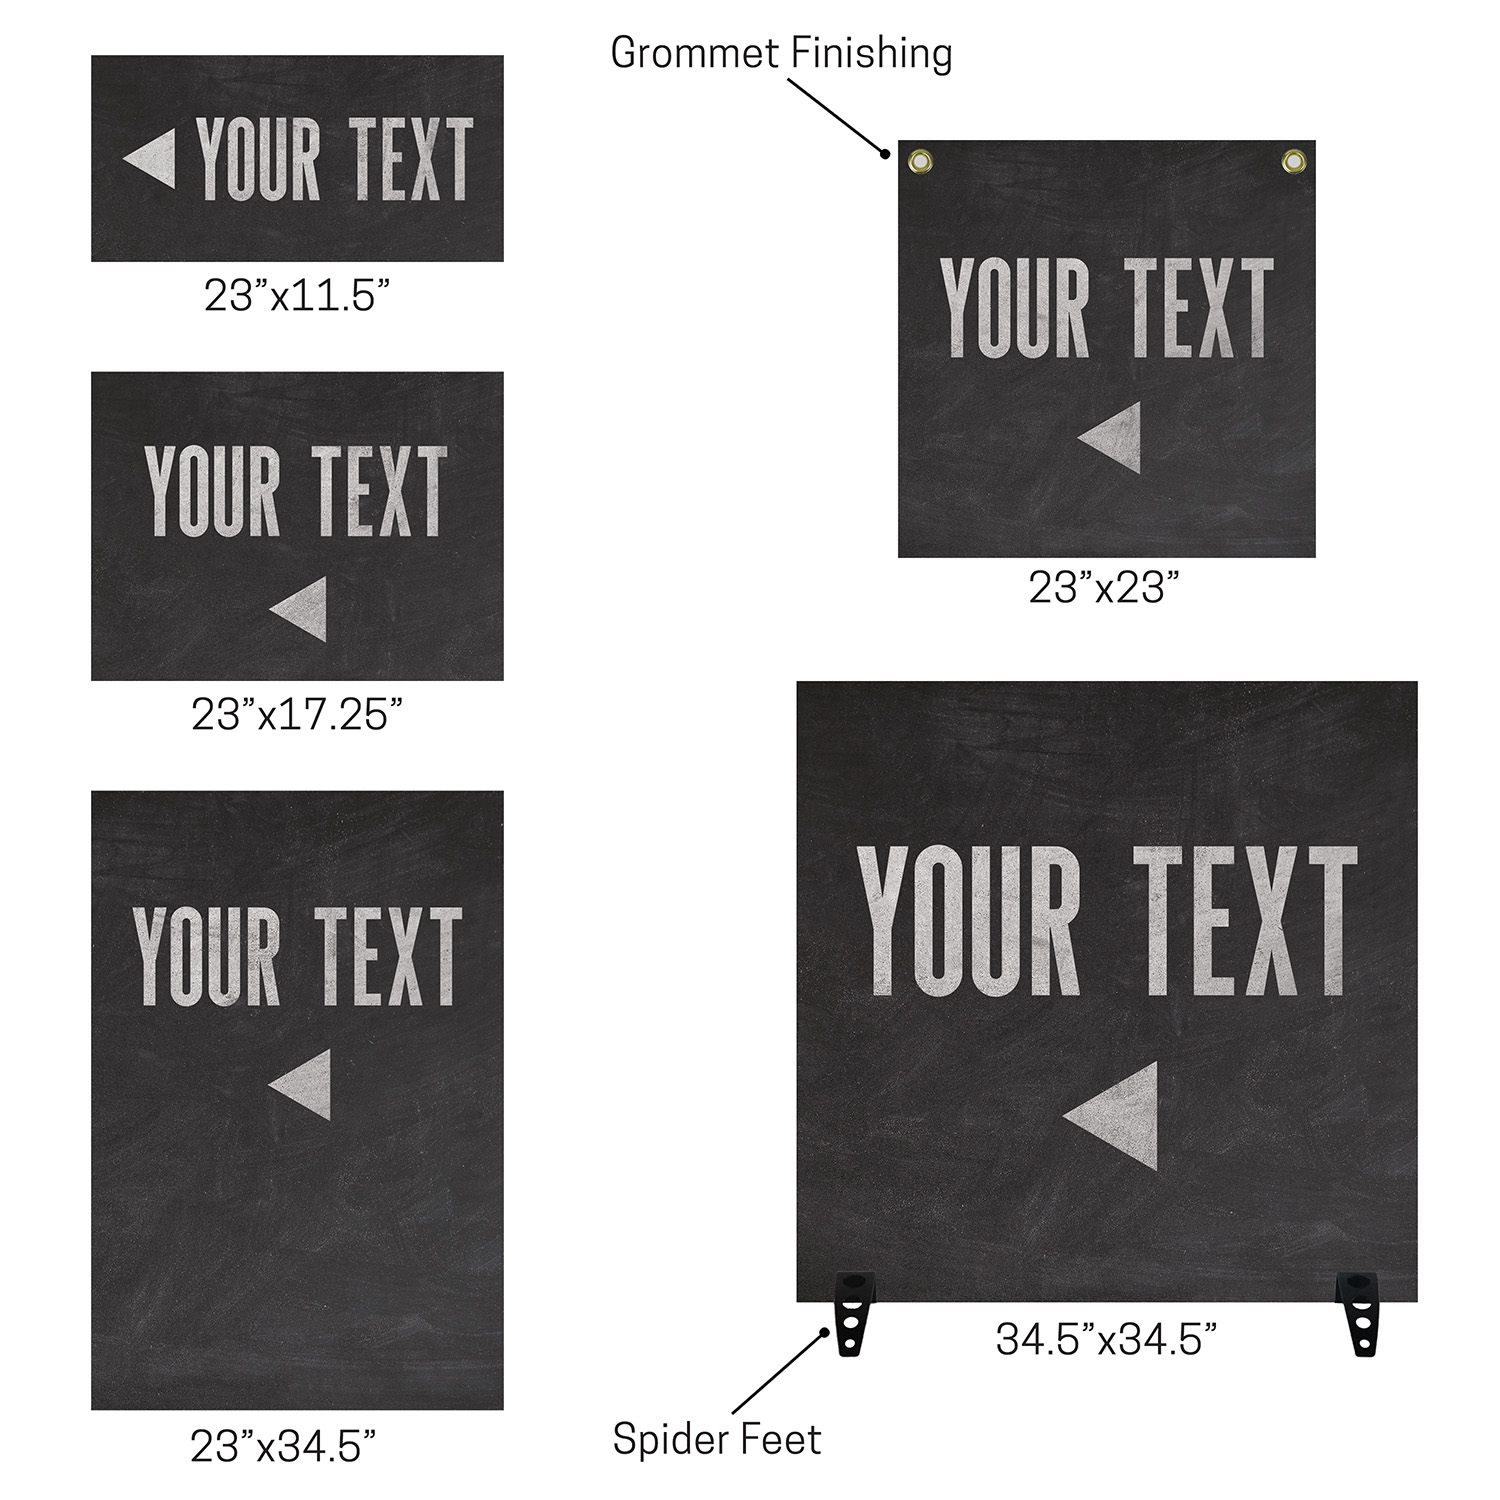 Rigid Signs, Directional, General Blue School Directional, 23 x 34.5 2